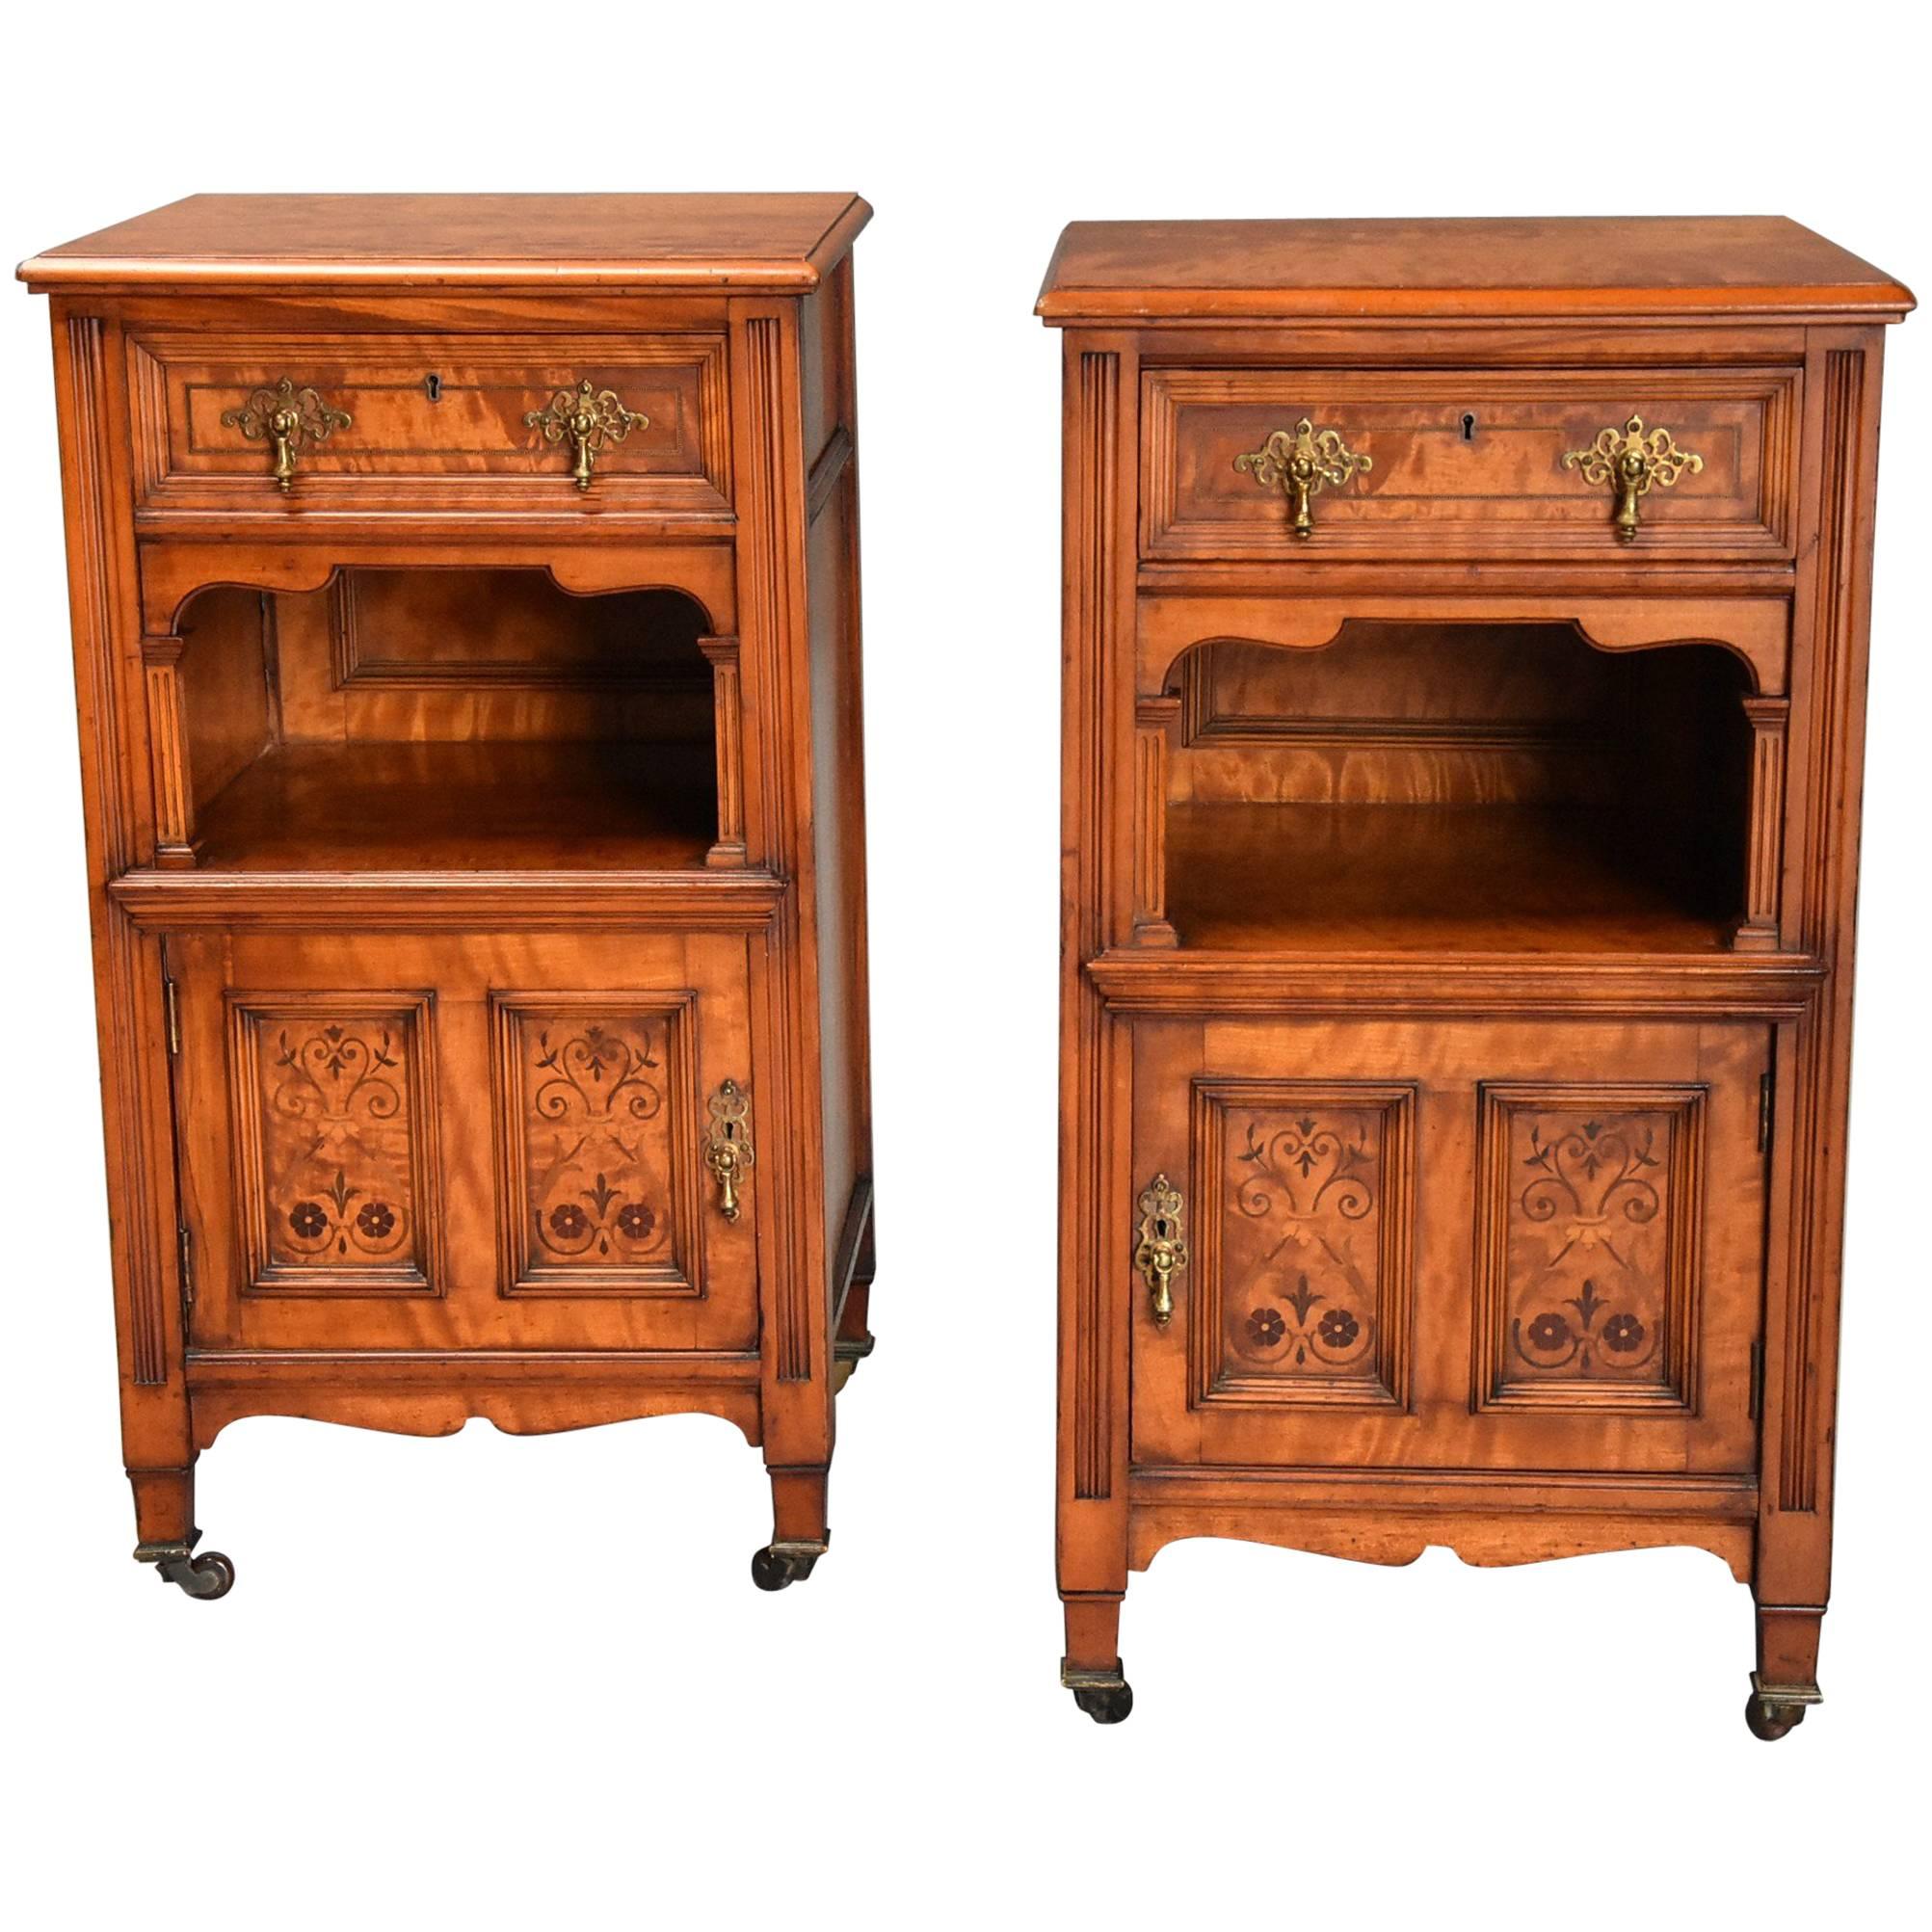 Pair of Late 19th Century Satin Birch Bedside Cabinets with Aesthetic Influence